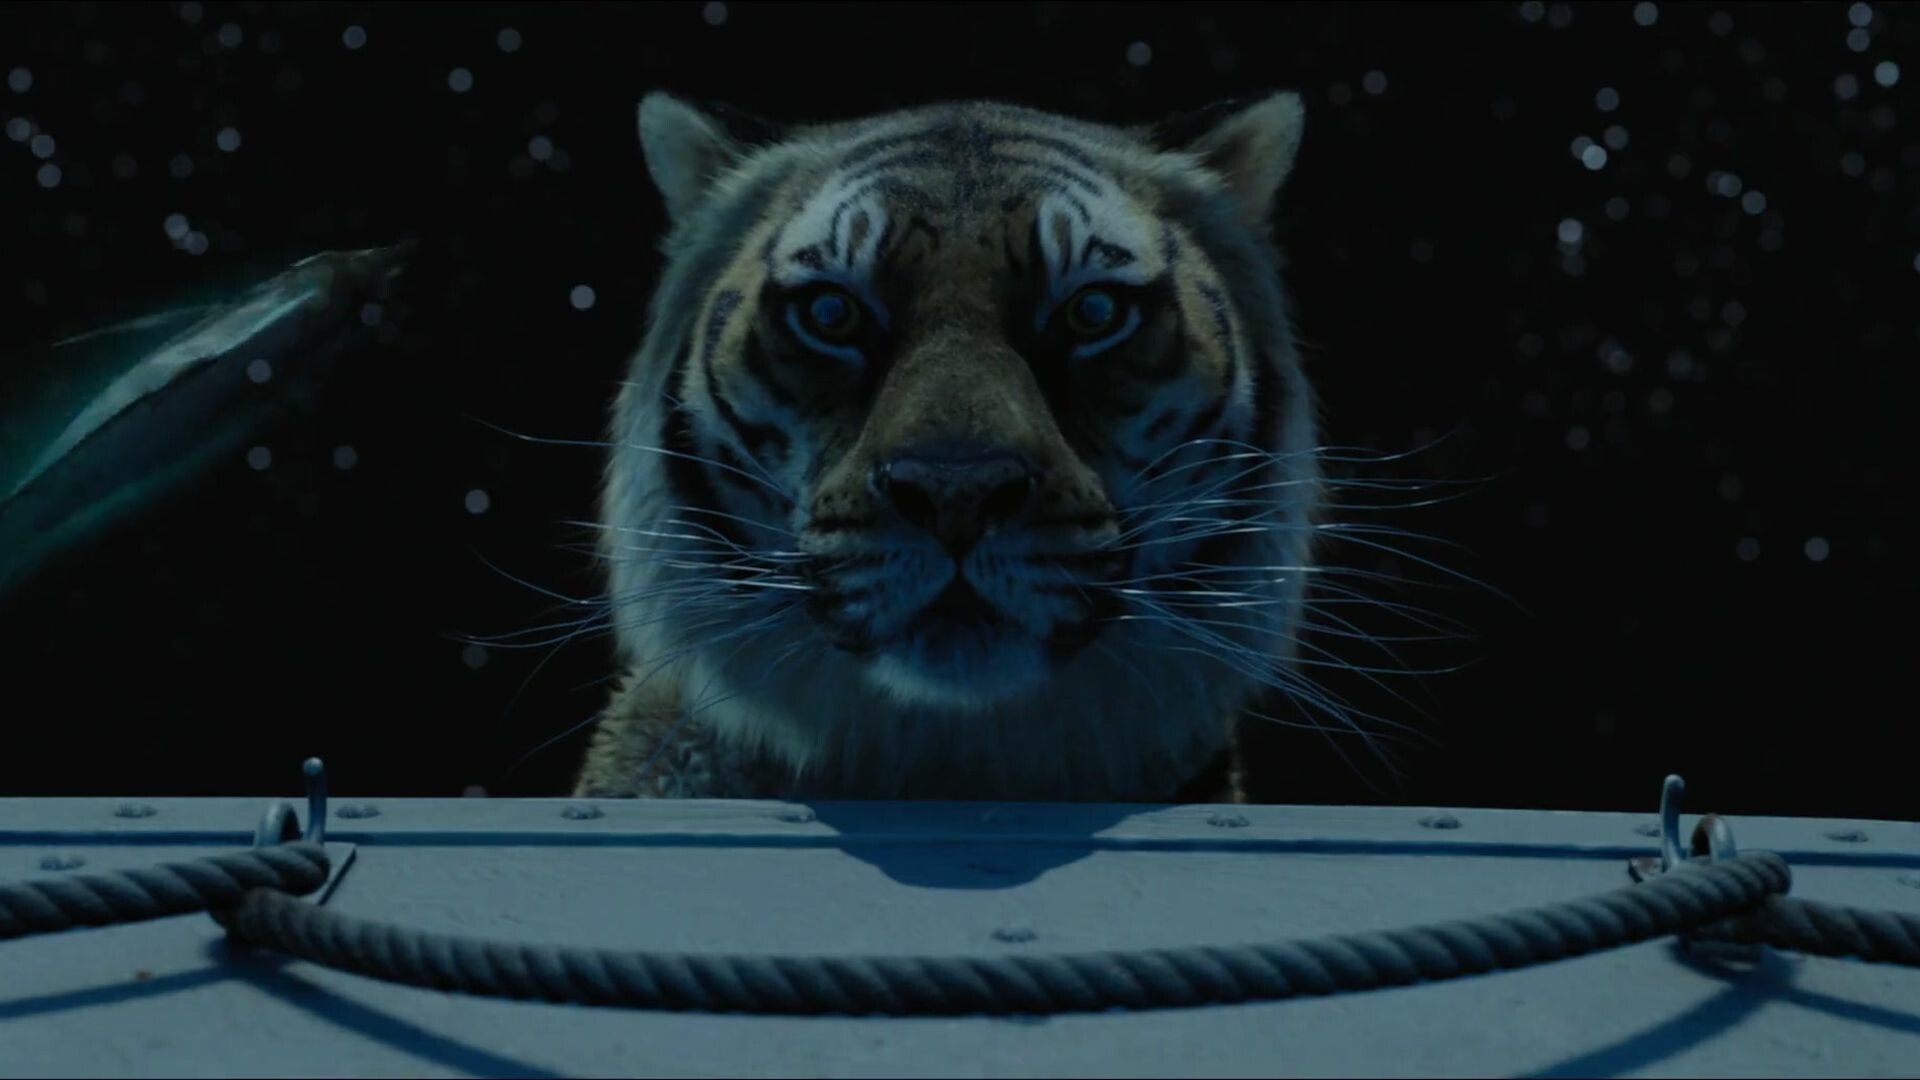 Life of Pi: The film's musical score was composed by Mychael Danna, who previously wrote the music to Lee's films The Ice Storm and Ride with the Devil. 1920x1080 Full HD Background.